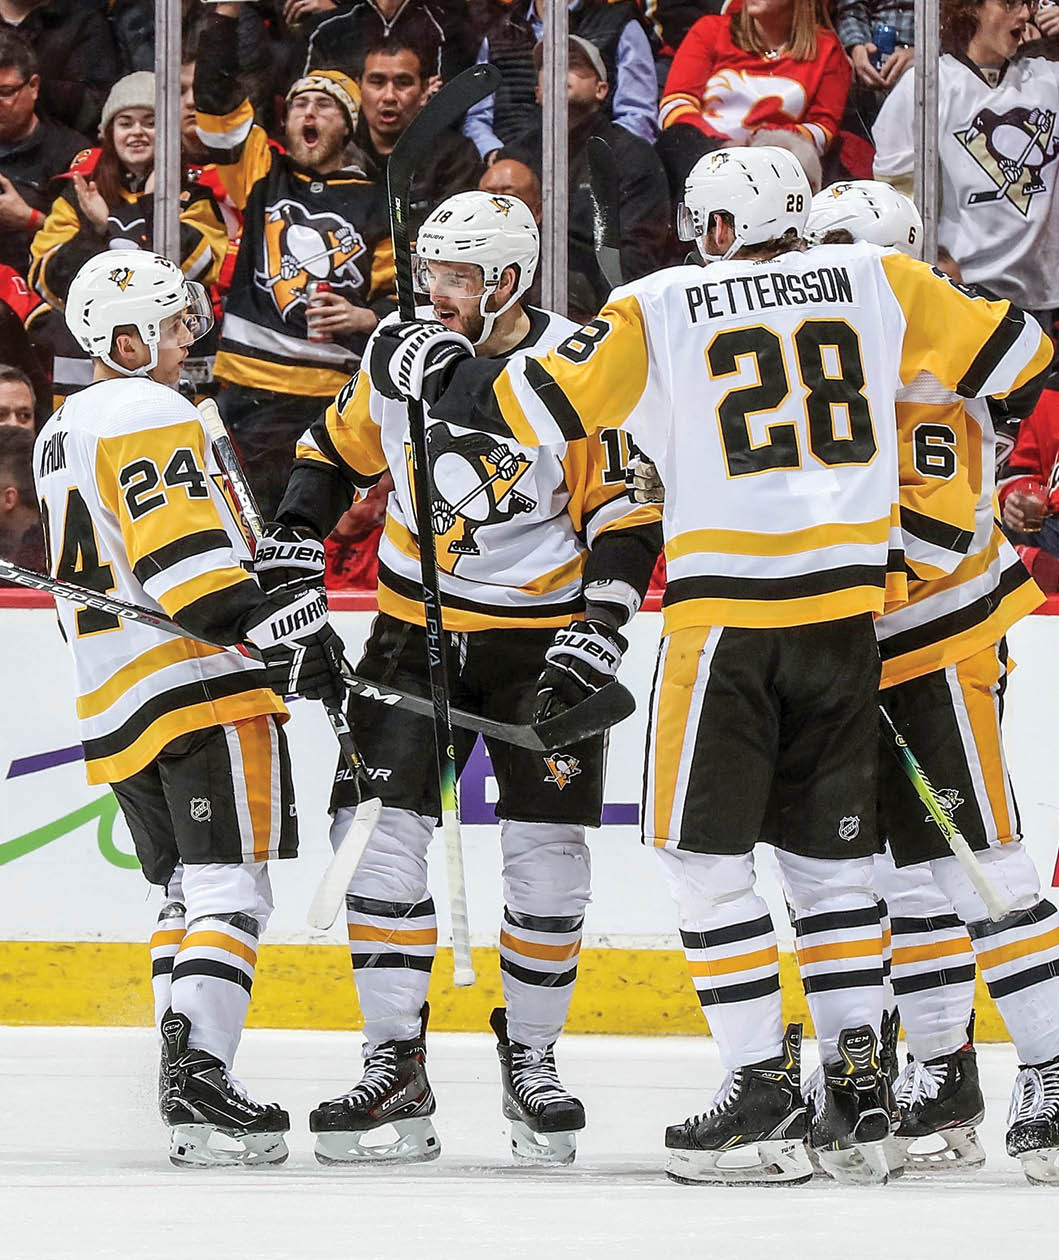 CALGARY, AB - DECEMBER 17: Alex Galchenyuk #18, Dominik Kahun #24, Marcus Pettersson #28 and John Marino #6 of the Pittsburgh Penguins celebrate a goal against the Calgary Flames on December 17, 2019 at the Scotiabank Saddledome in Calgary, Alberta, Canada  (Photo by Gerry Thomas NHLI via Getty Images)